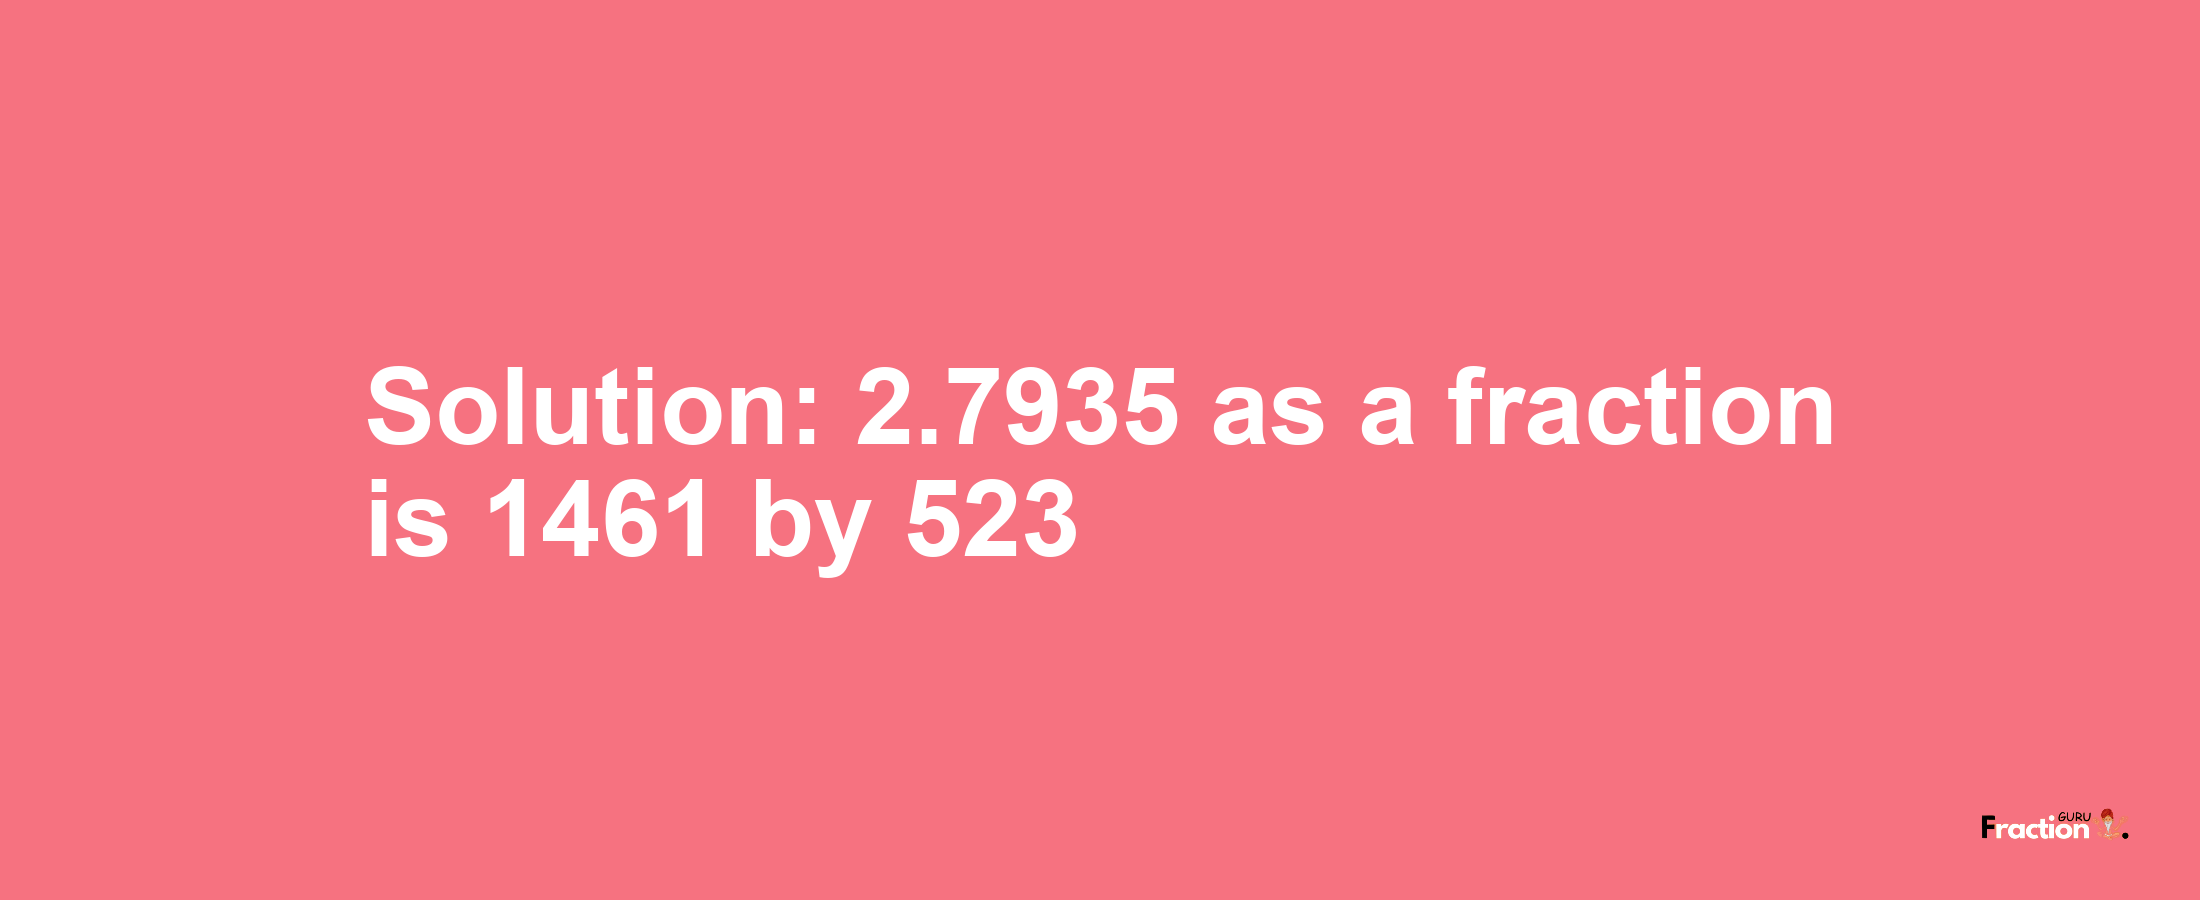 Solution:2.7935 as a fraction is 1461/523